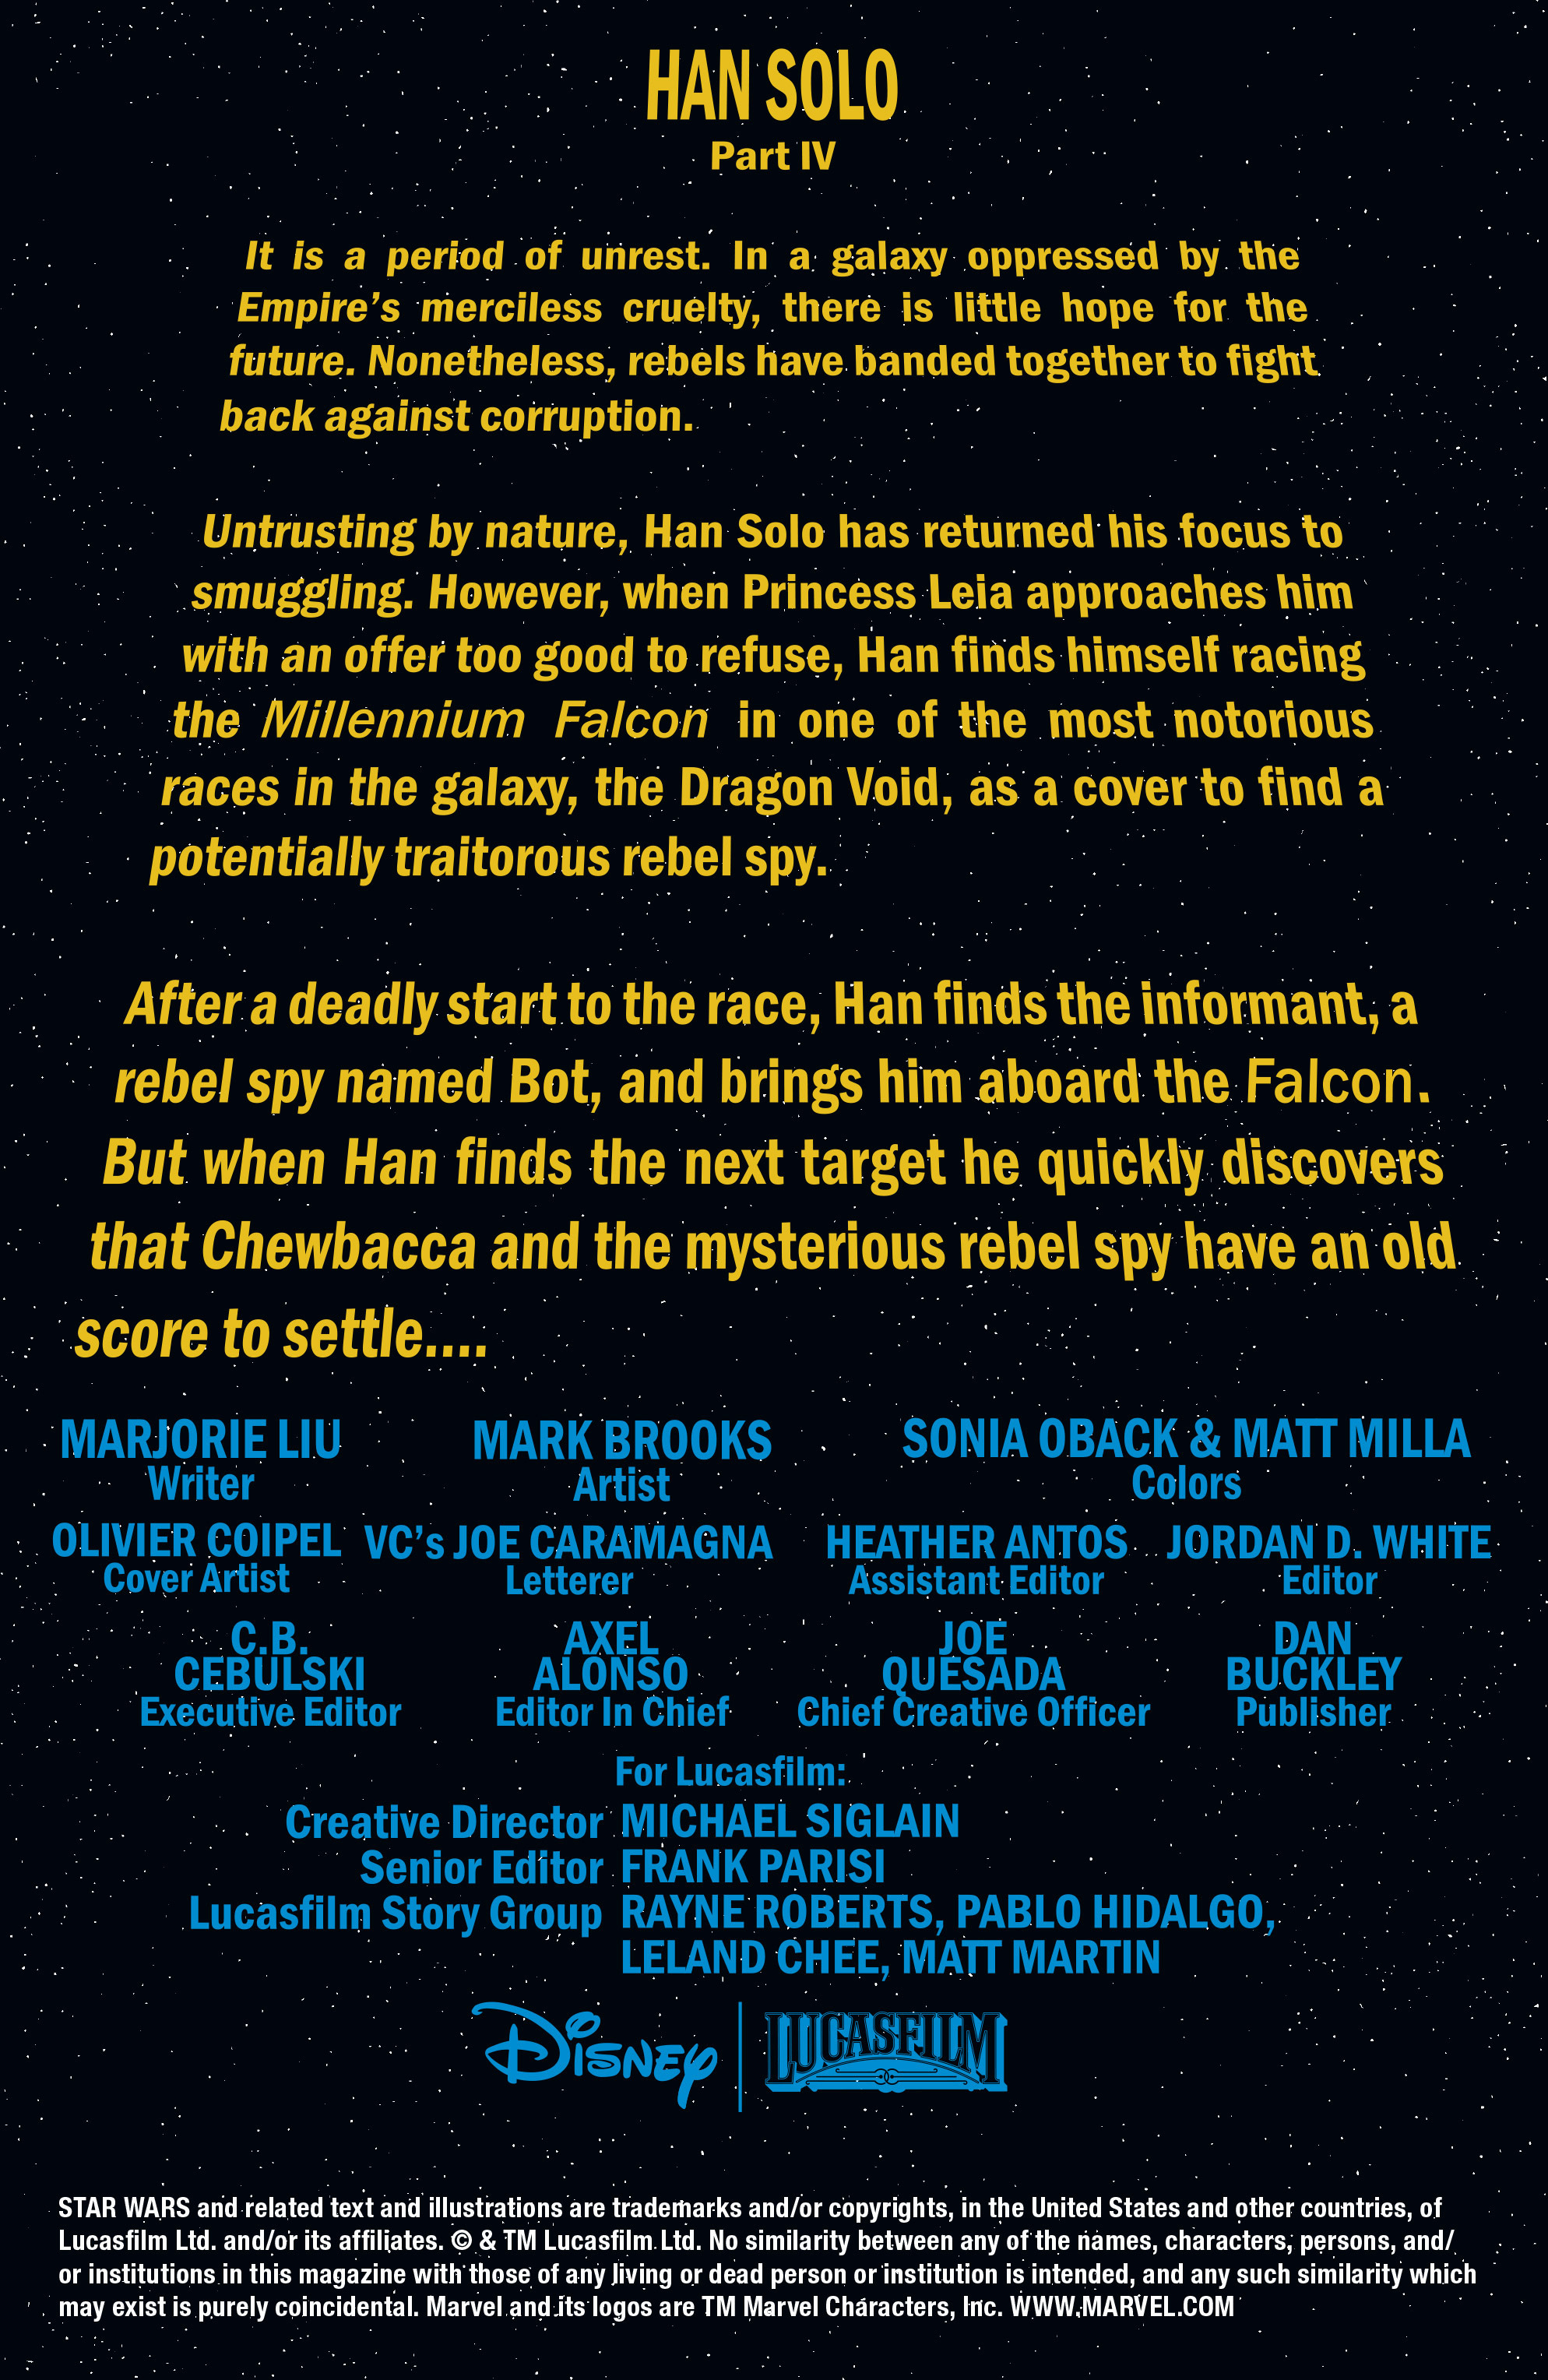 Read online Han Solo comic -  Issue #4 - 6